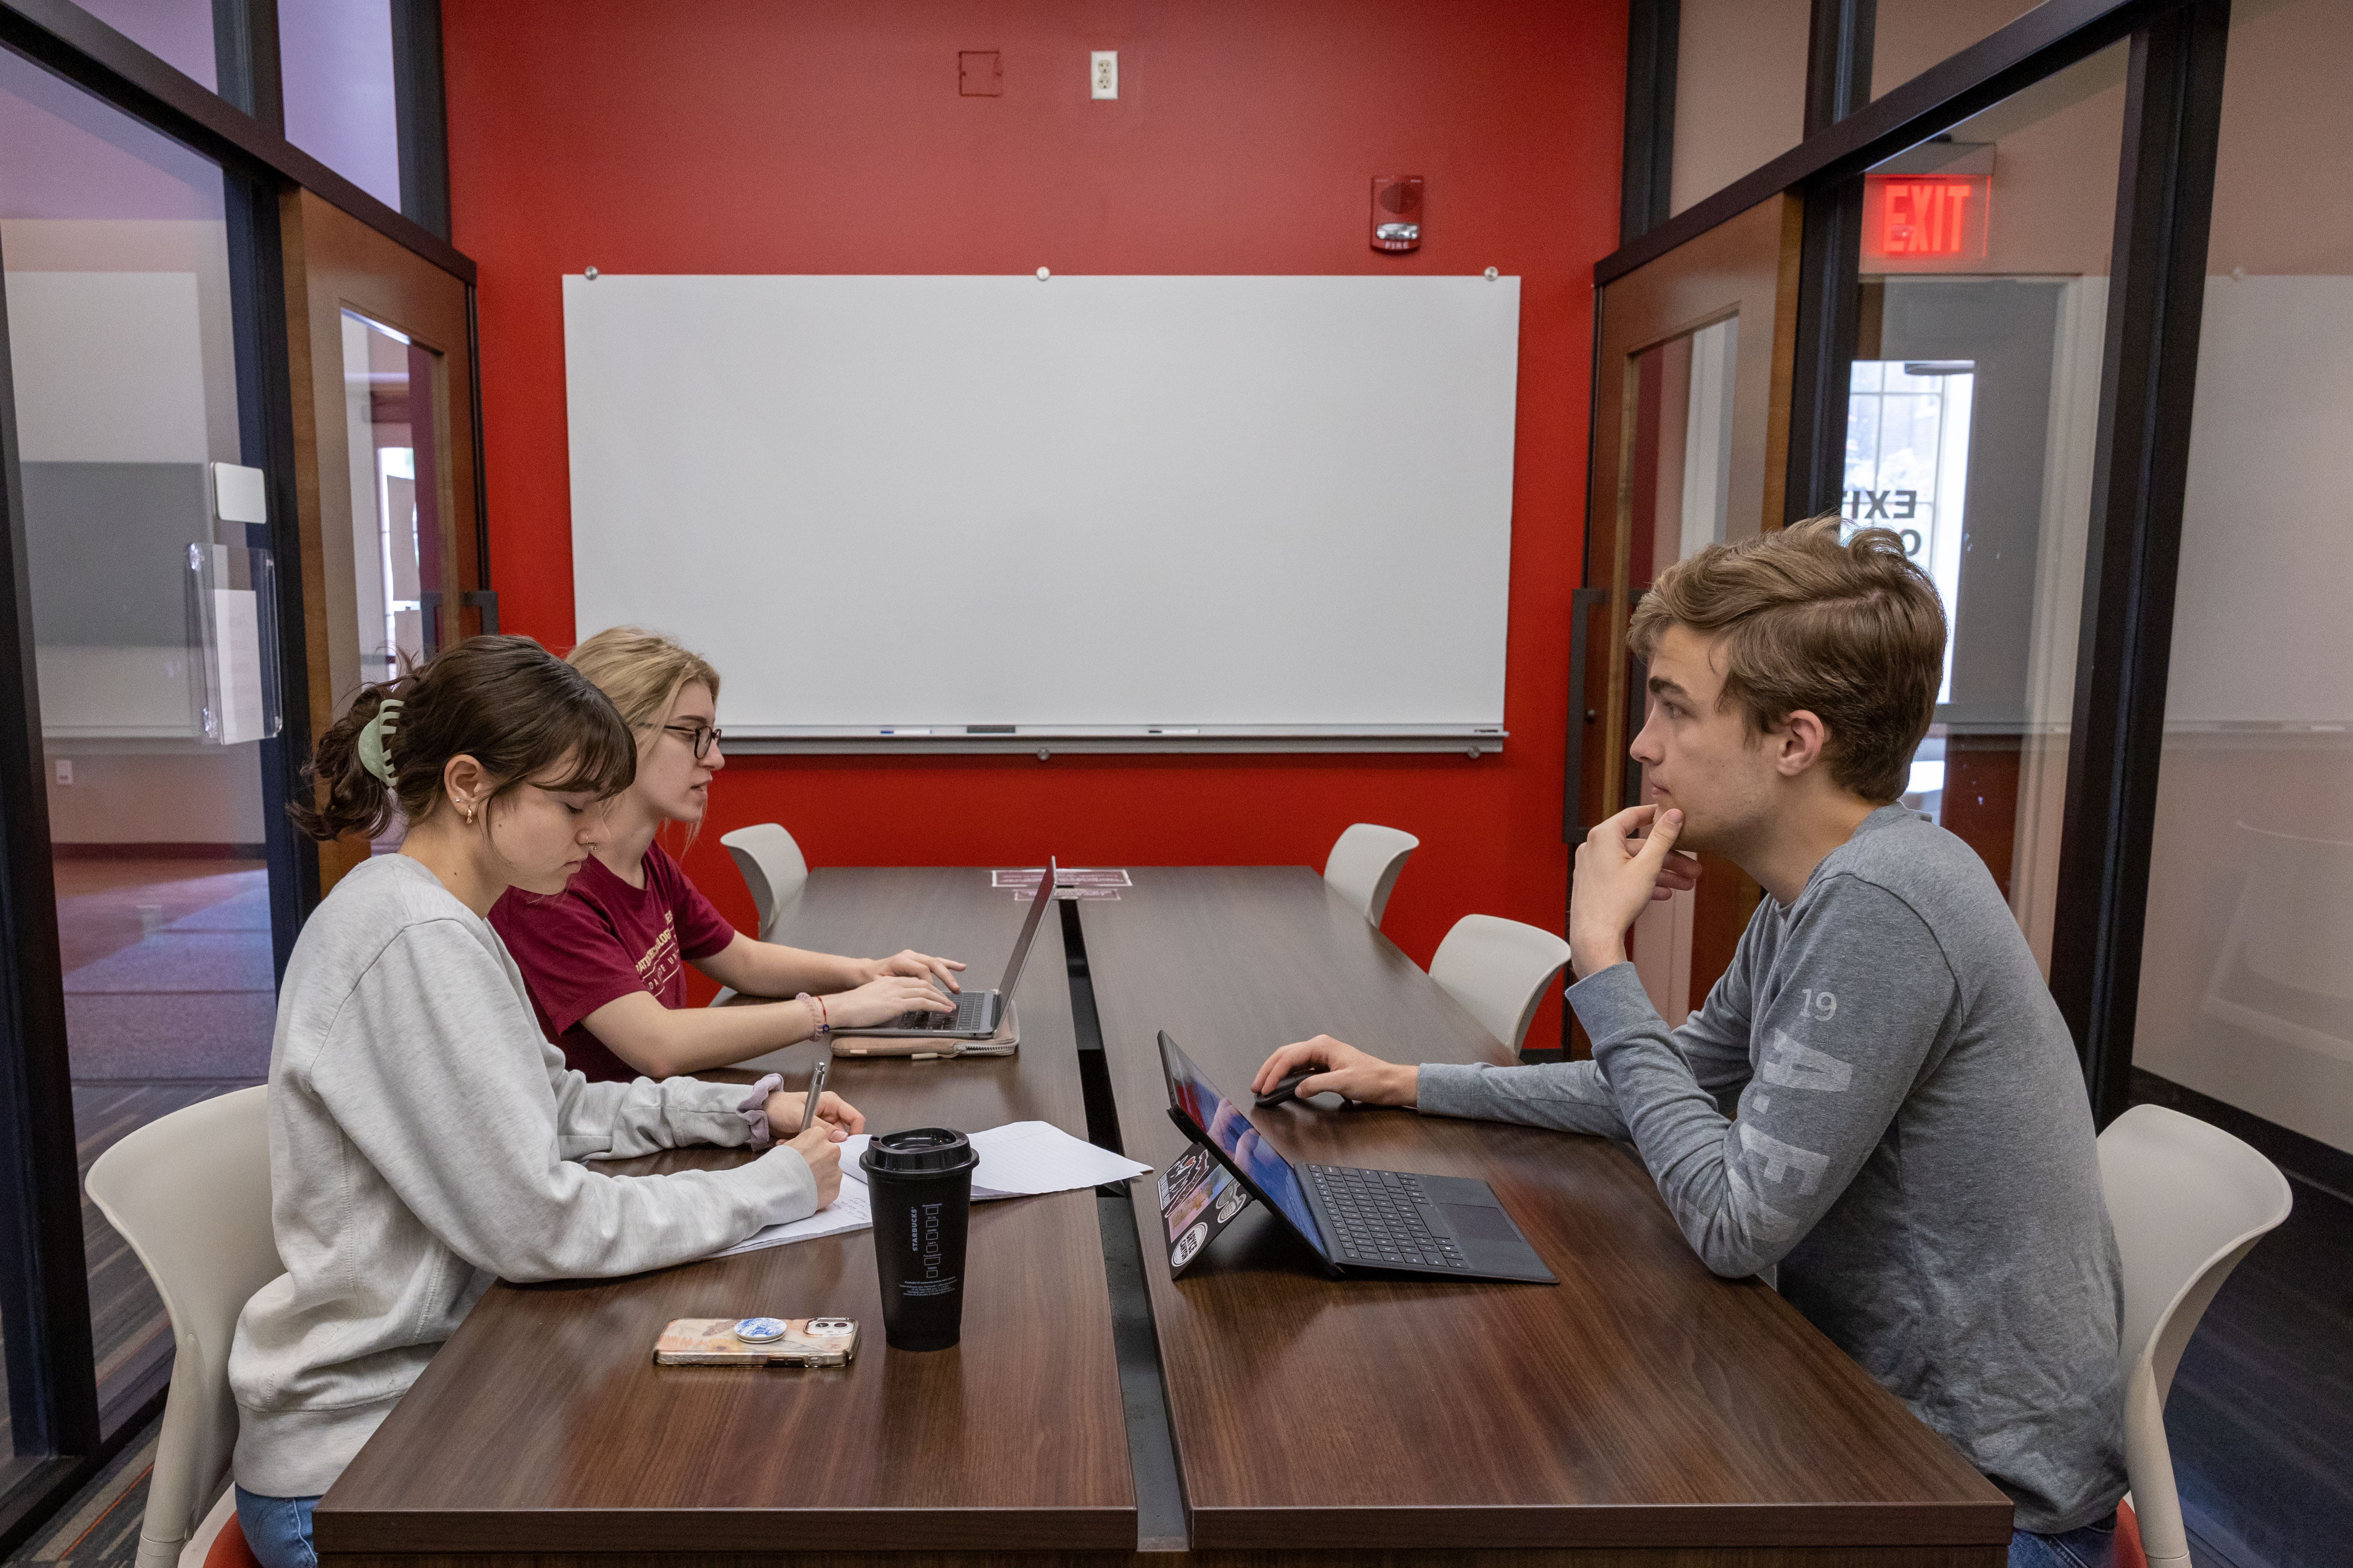 Two female students and one male student working together in a study room.